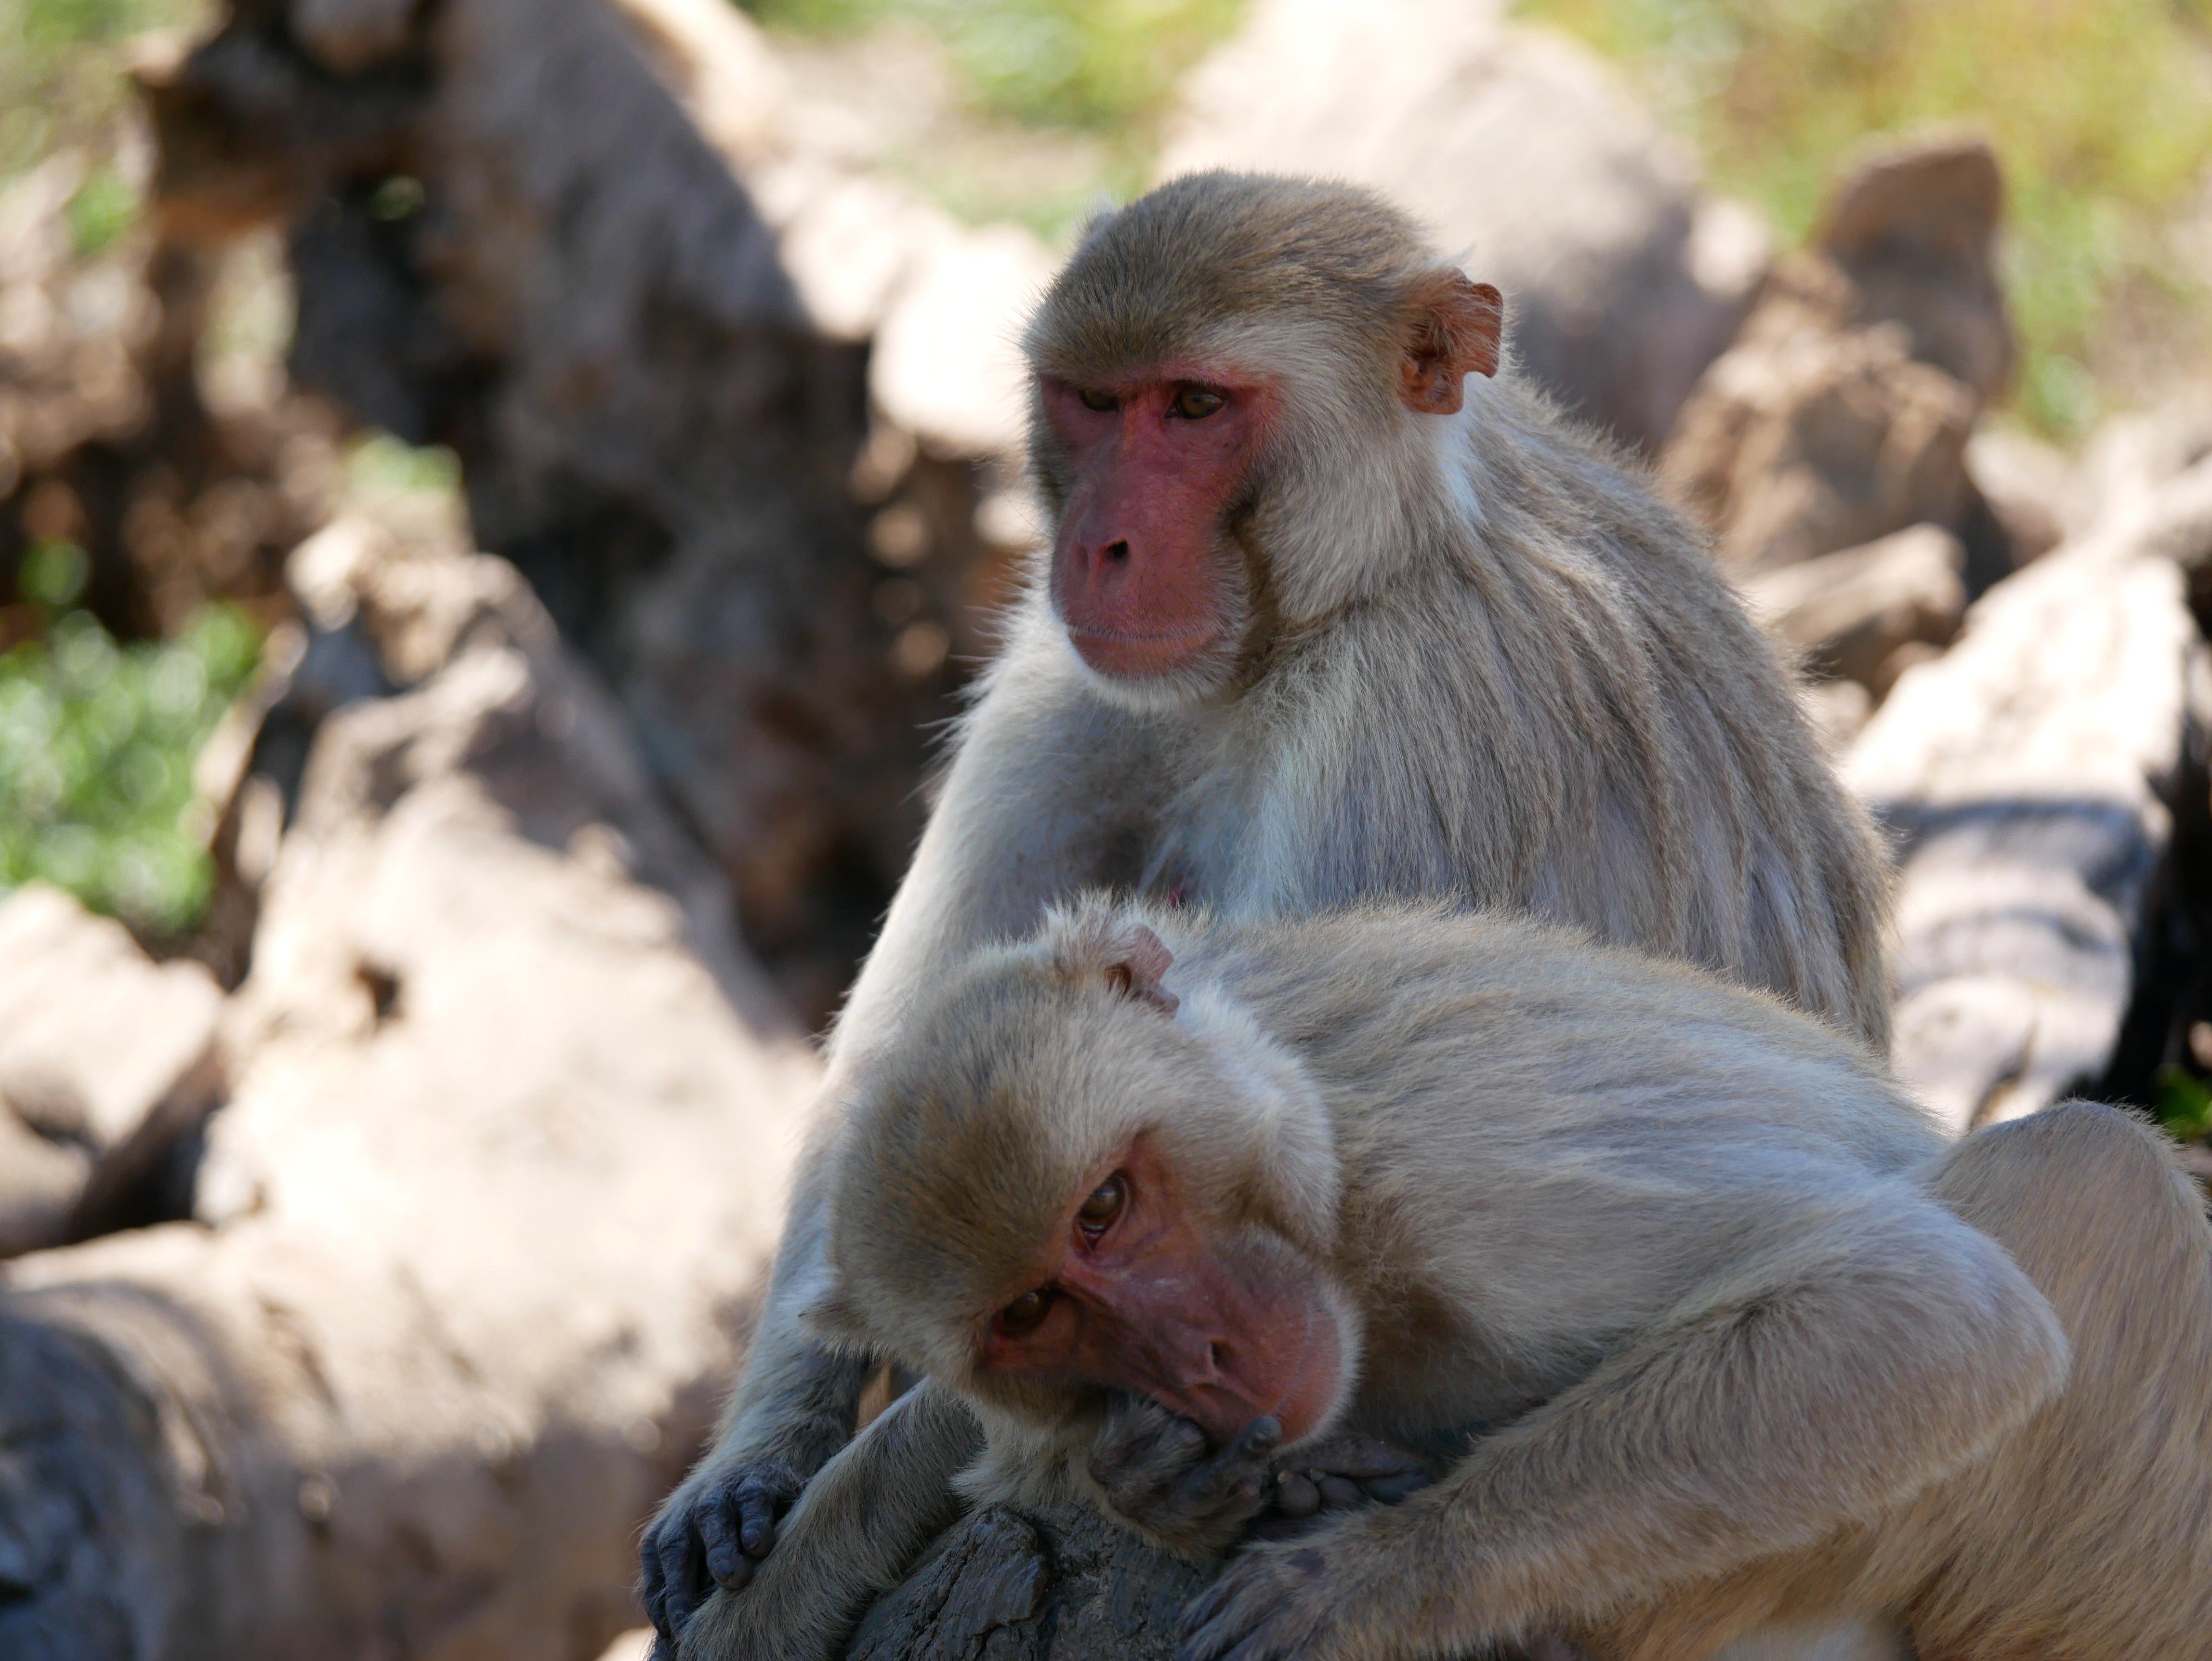 Manki Xxx V - Male Monkeys Have More Sex with Other Males Than with Females in This  Well-Studied Group | Scientific American